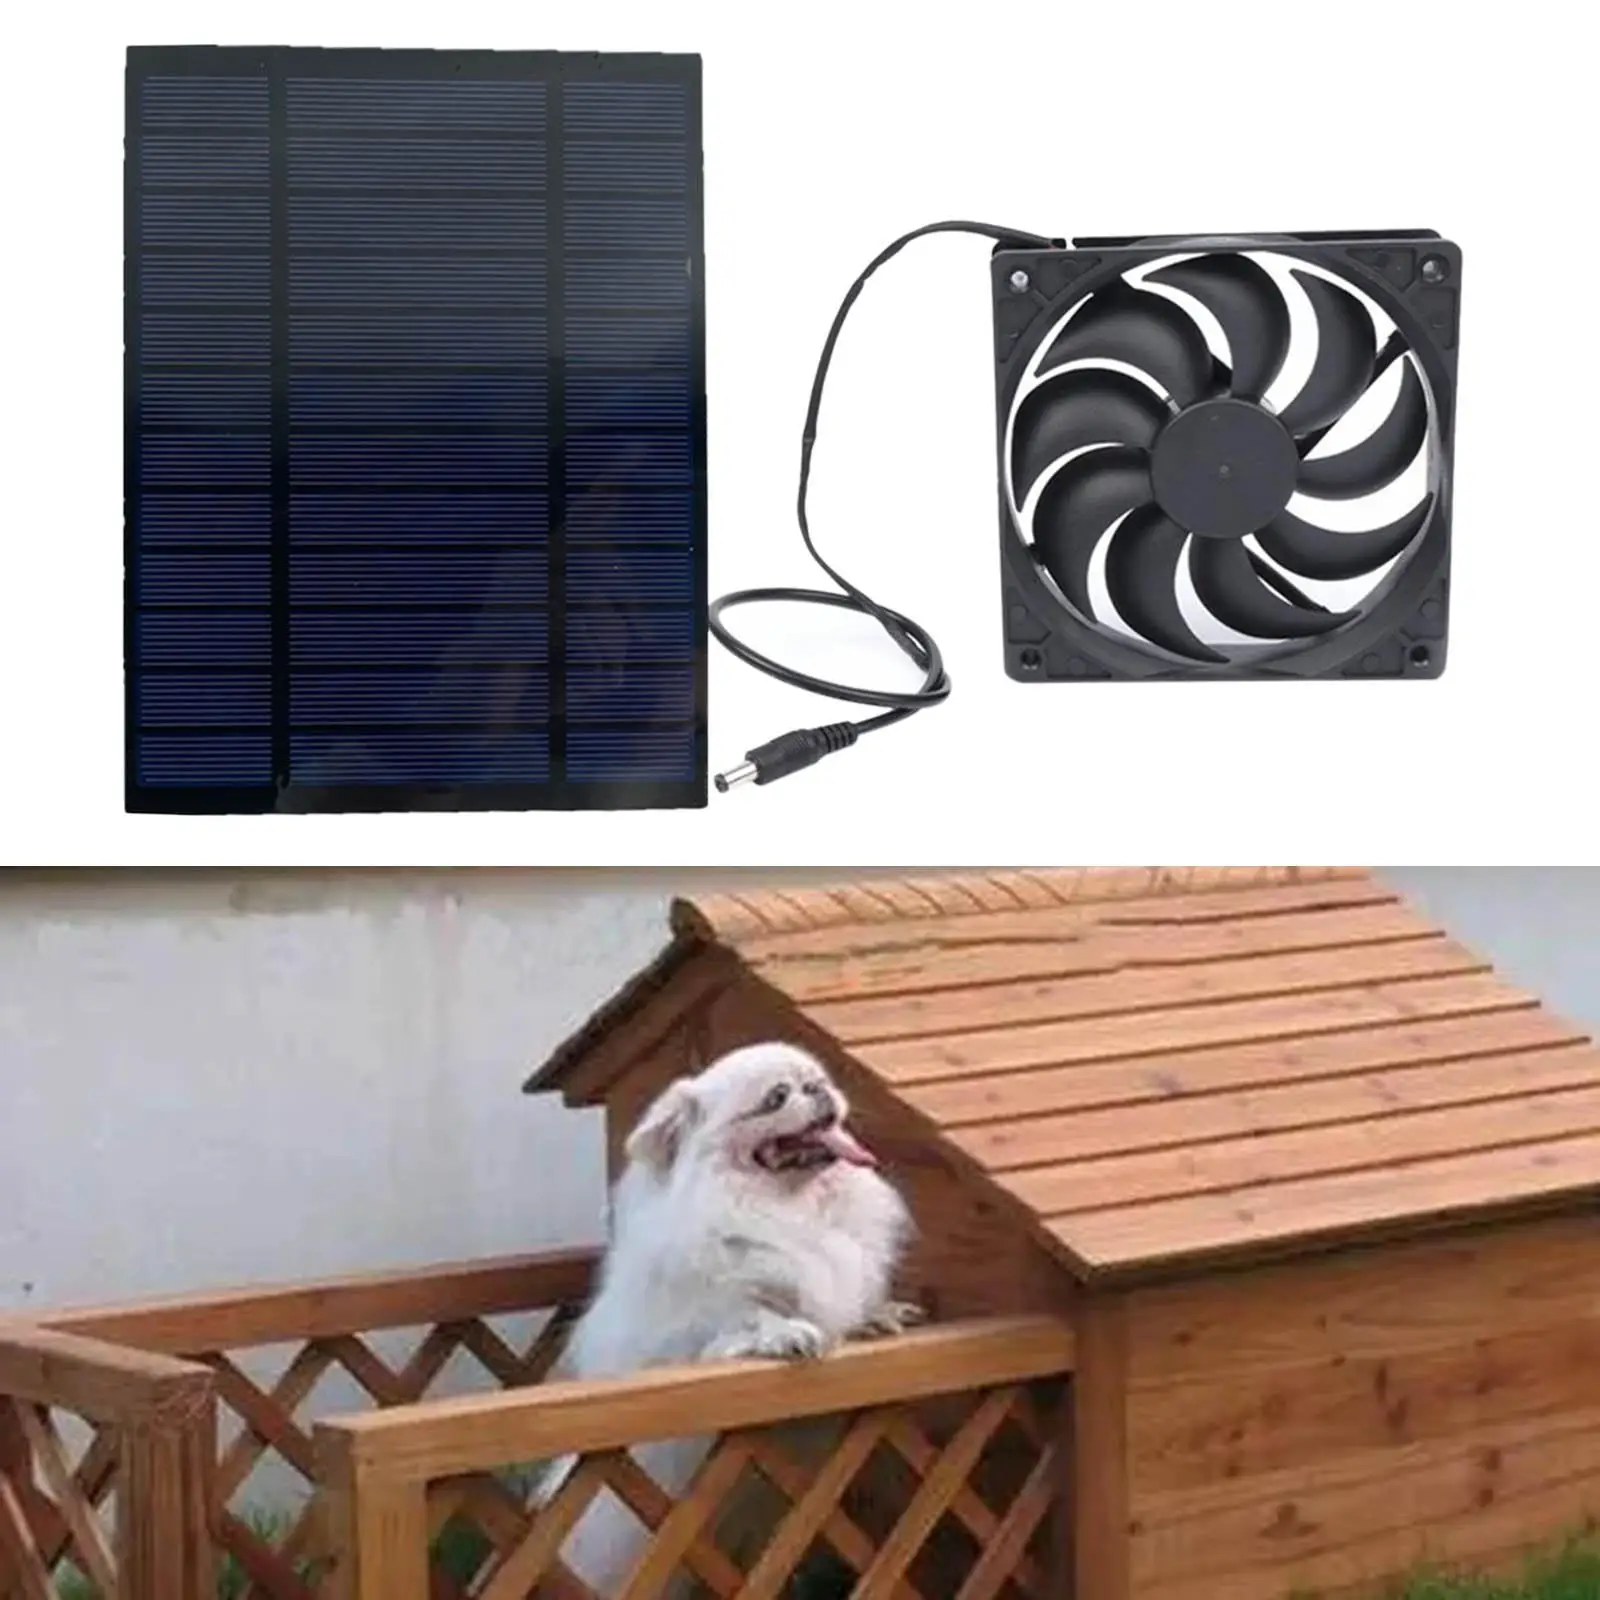 Free Energy Solar Powered Panel Fan Solar Panel Powered Outdoor Ventilator Fans for Chicken Coop Travelling Pet Dog House Sheds